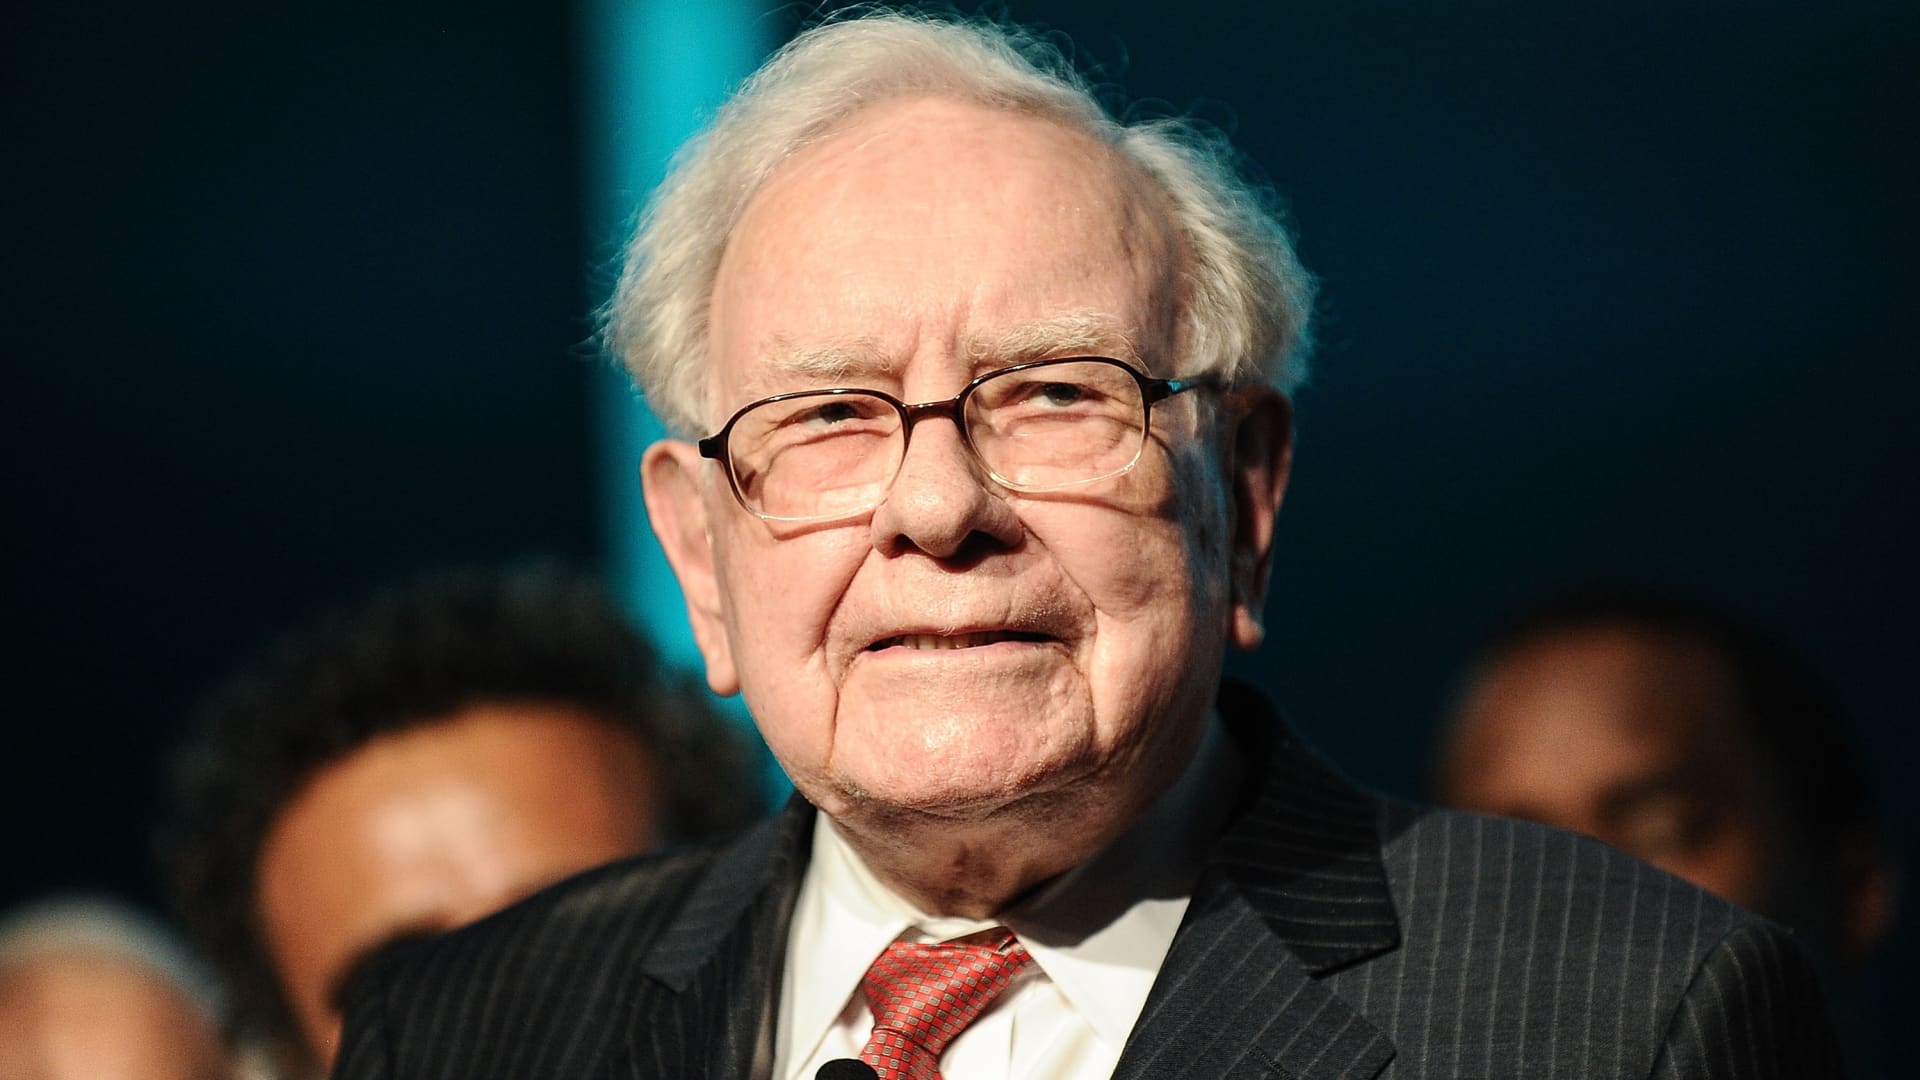 Warren Buffett scoops up another $1 billion in Occidental shares, bringing total stake to $7 billion